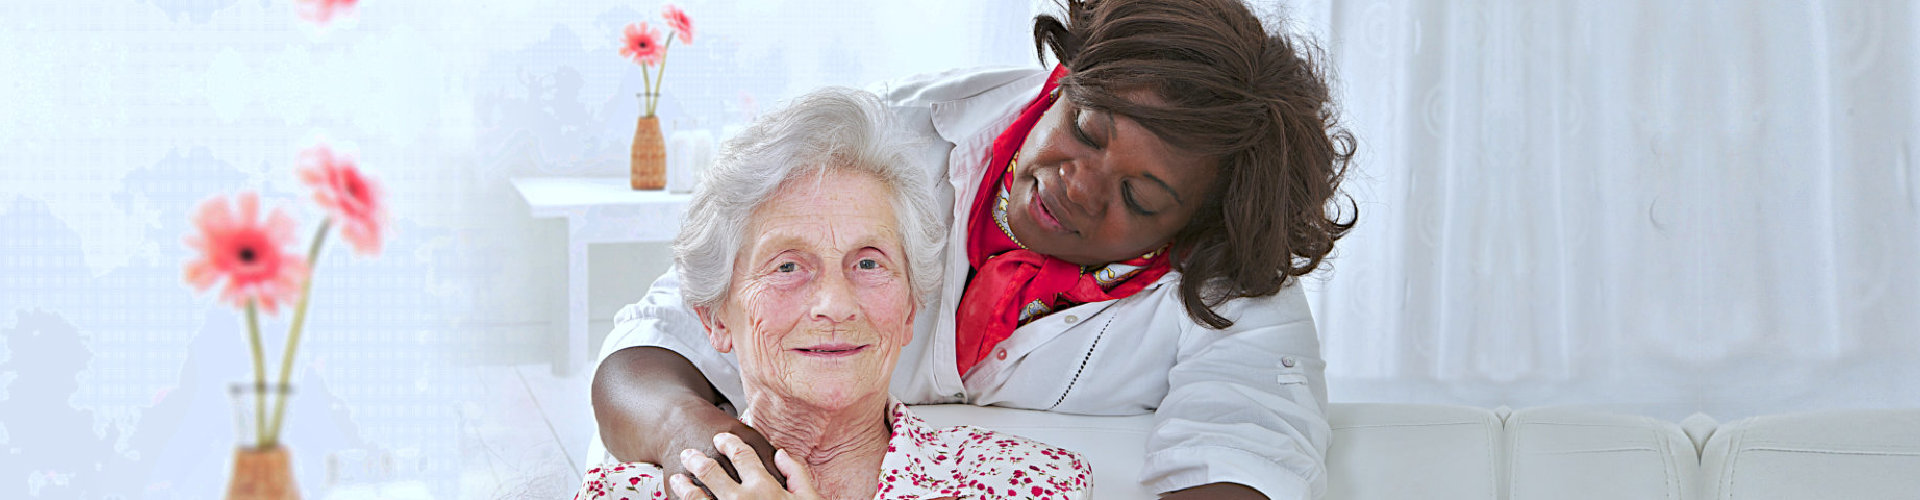 caregiver hugging the elderly woman from behind